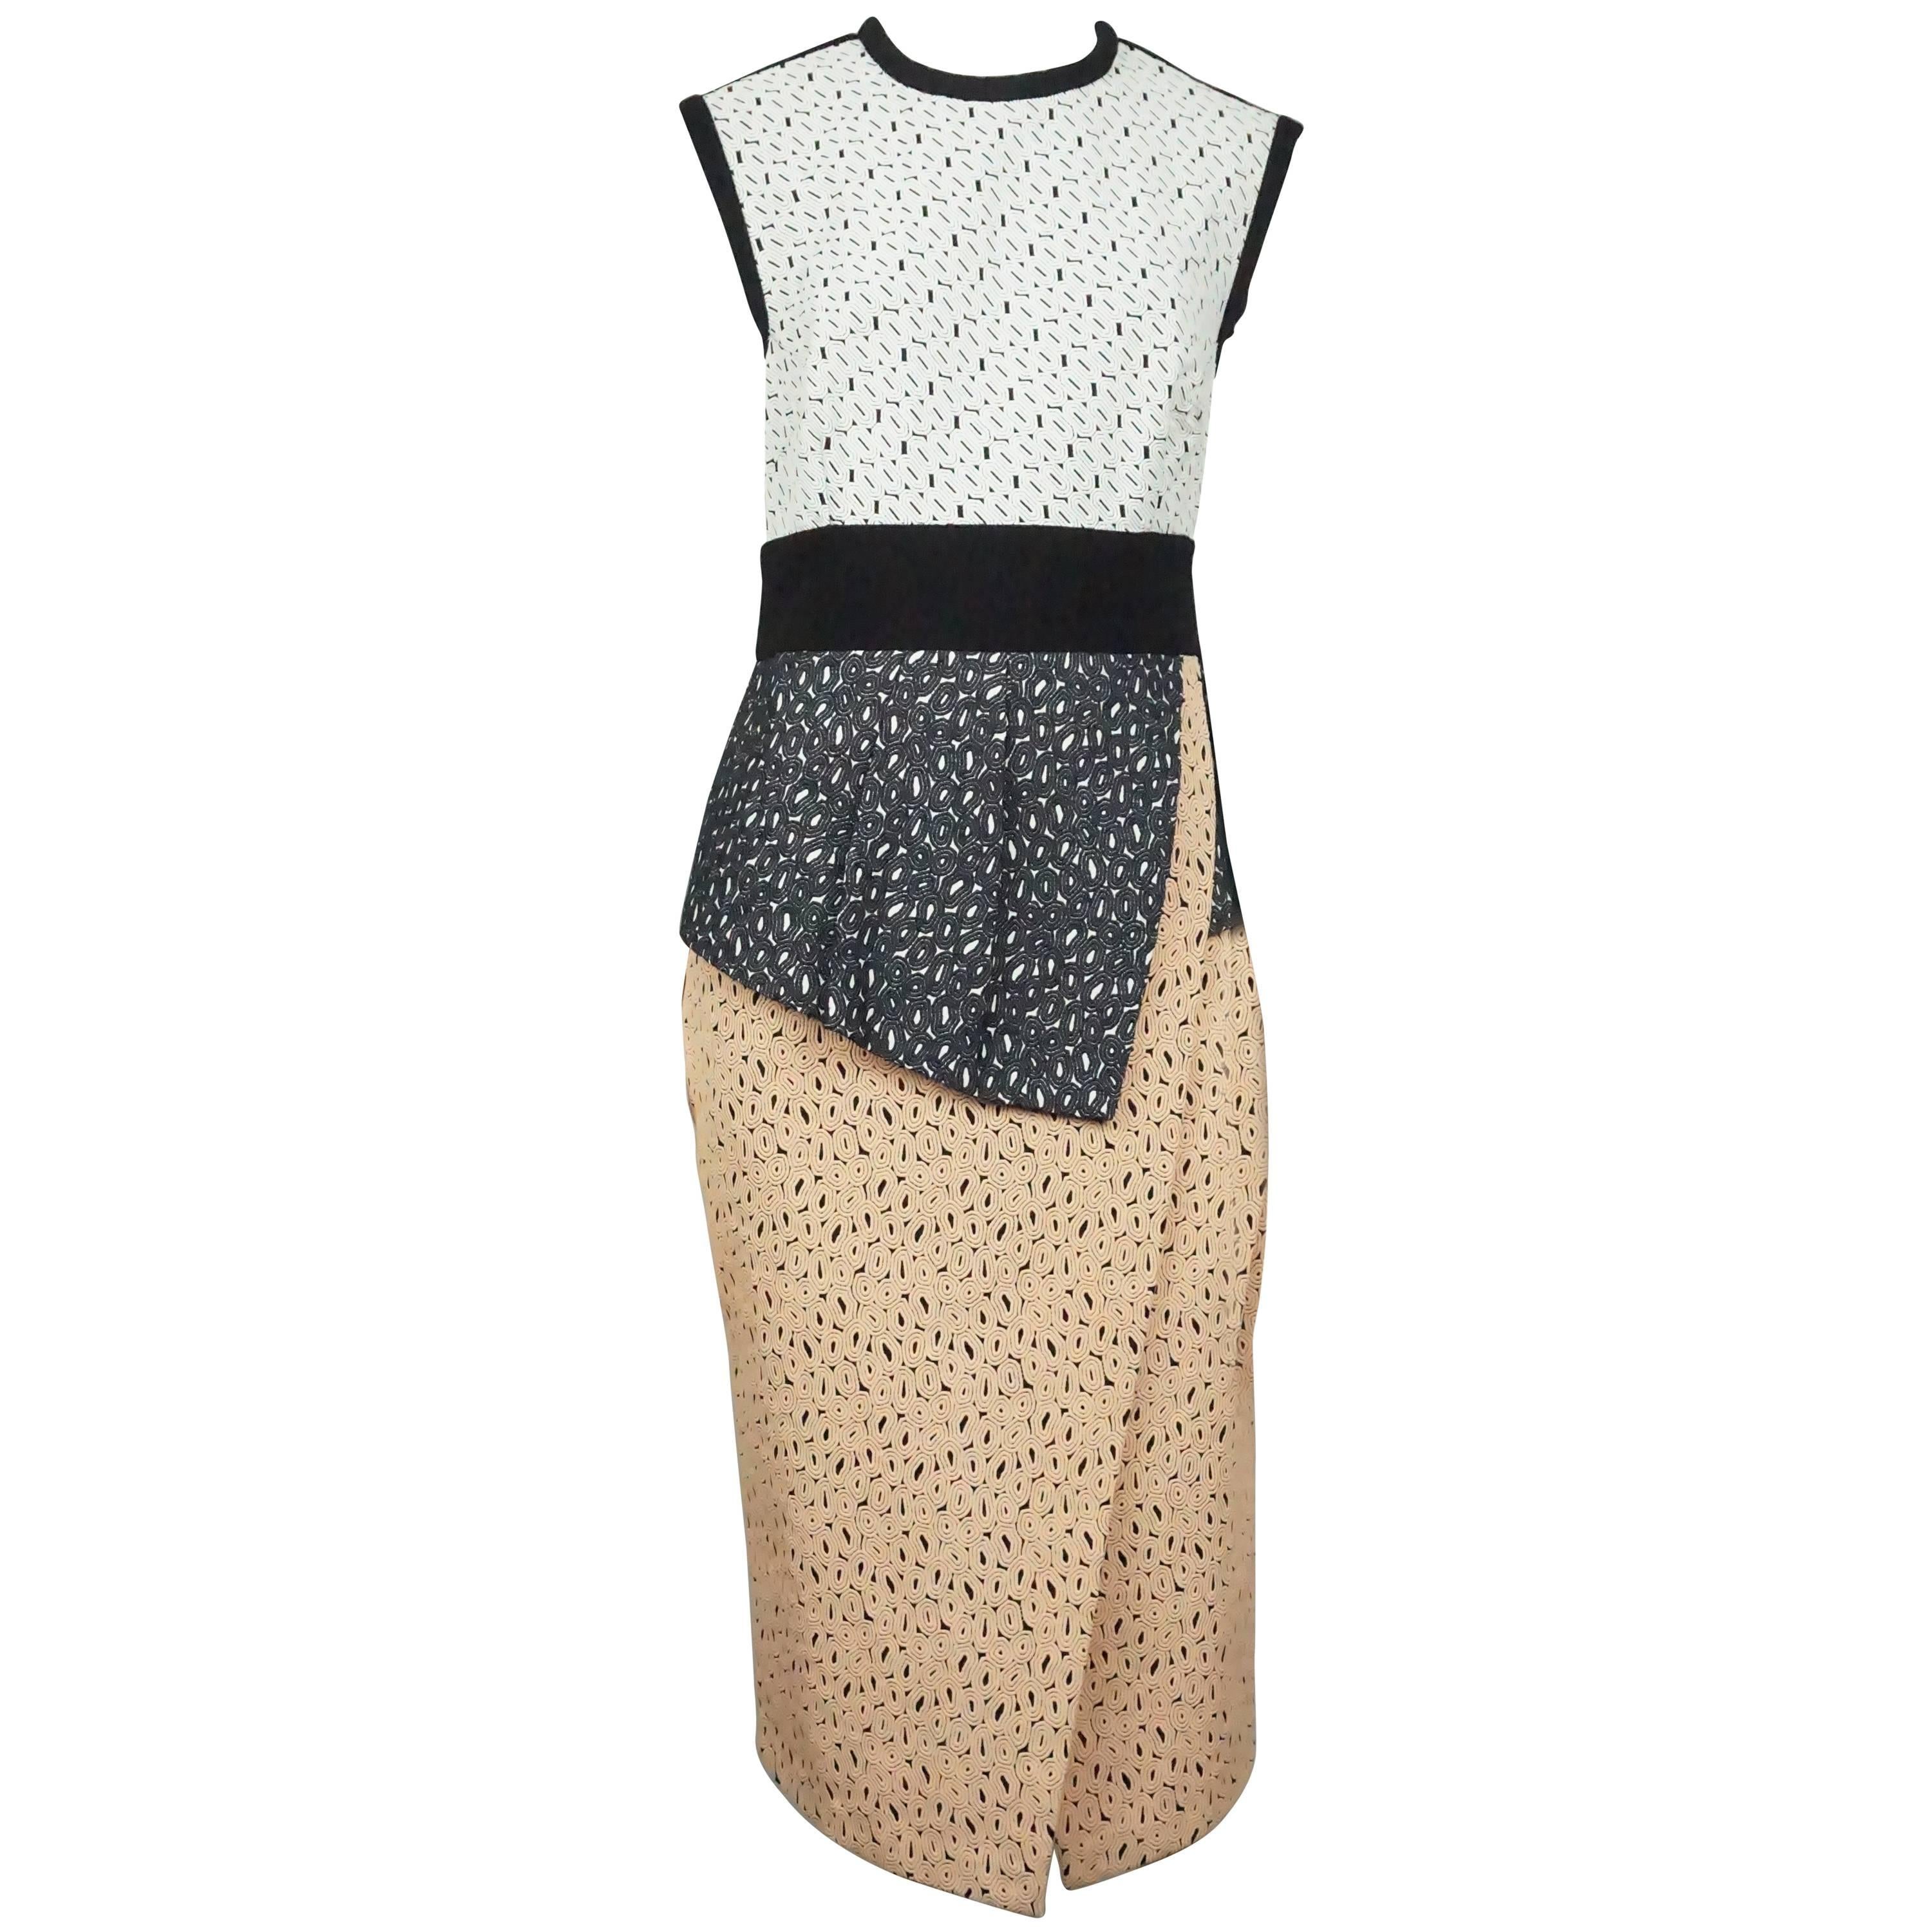 Proenza Schouler Black White and Peach Embroidered Asymmetrical Dress